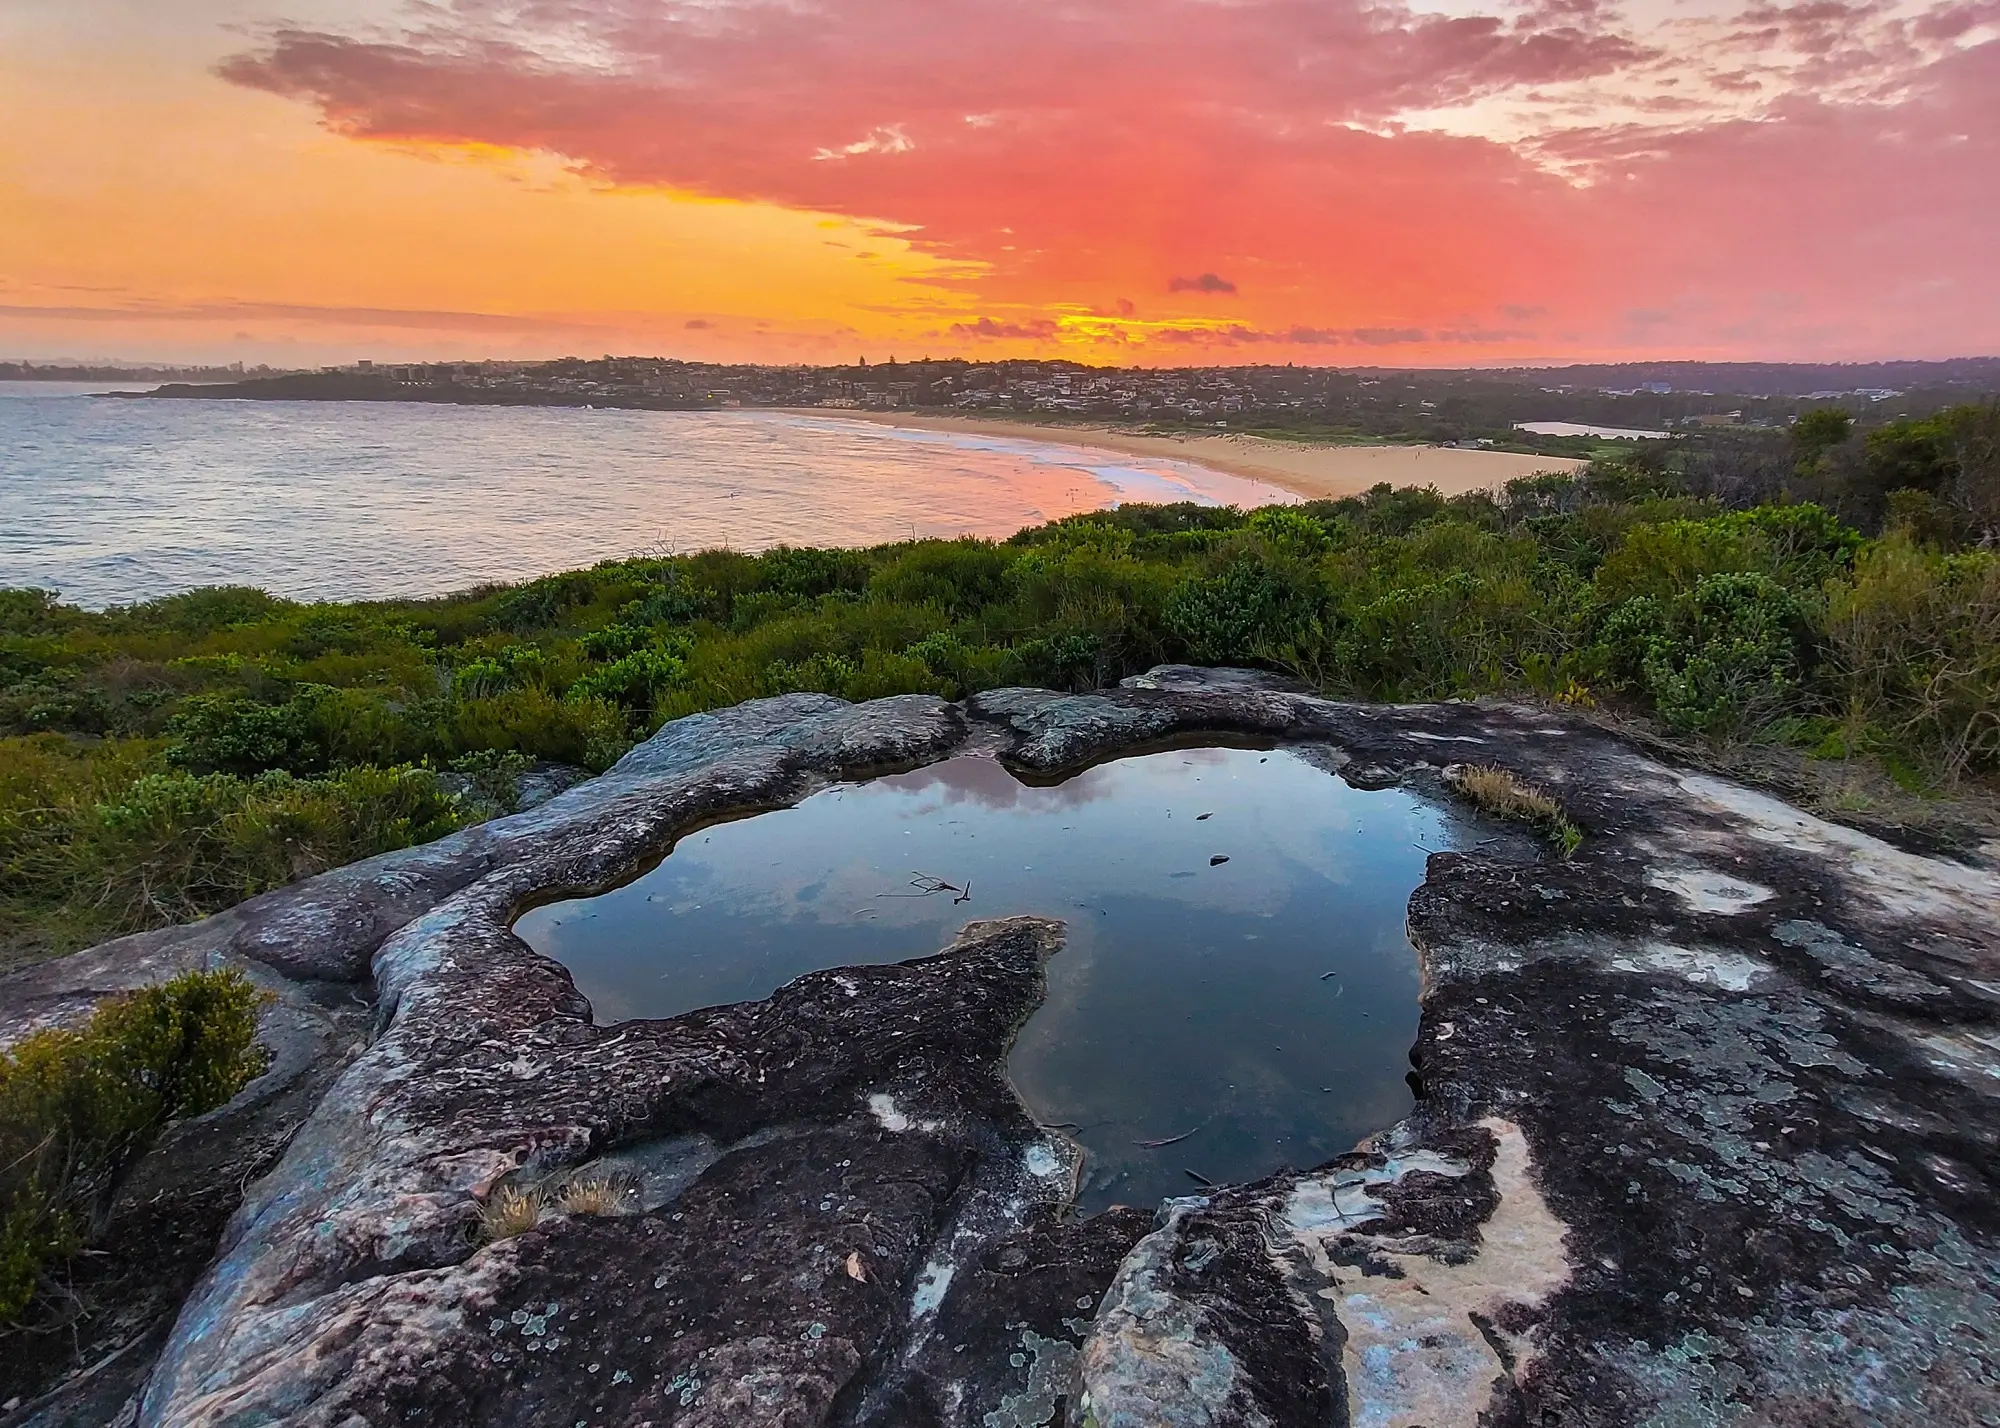 A large rock with a puddle of water in North Curl Curl Beach, NSW, Australia.